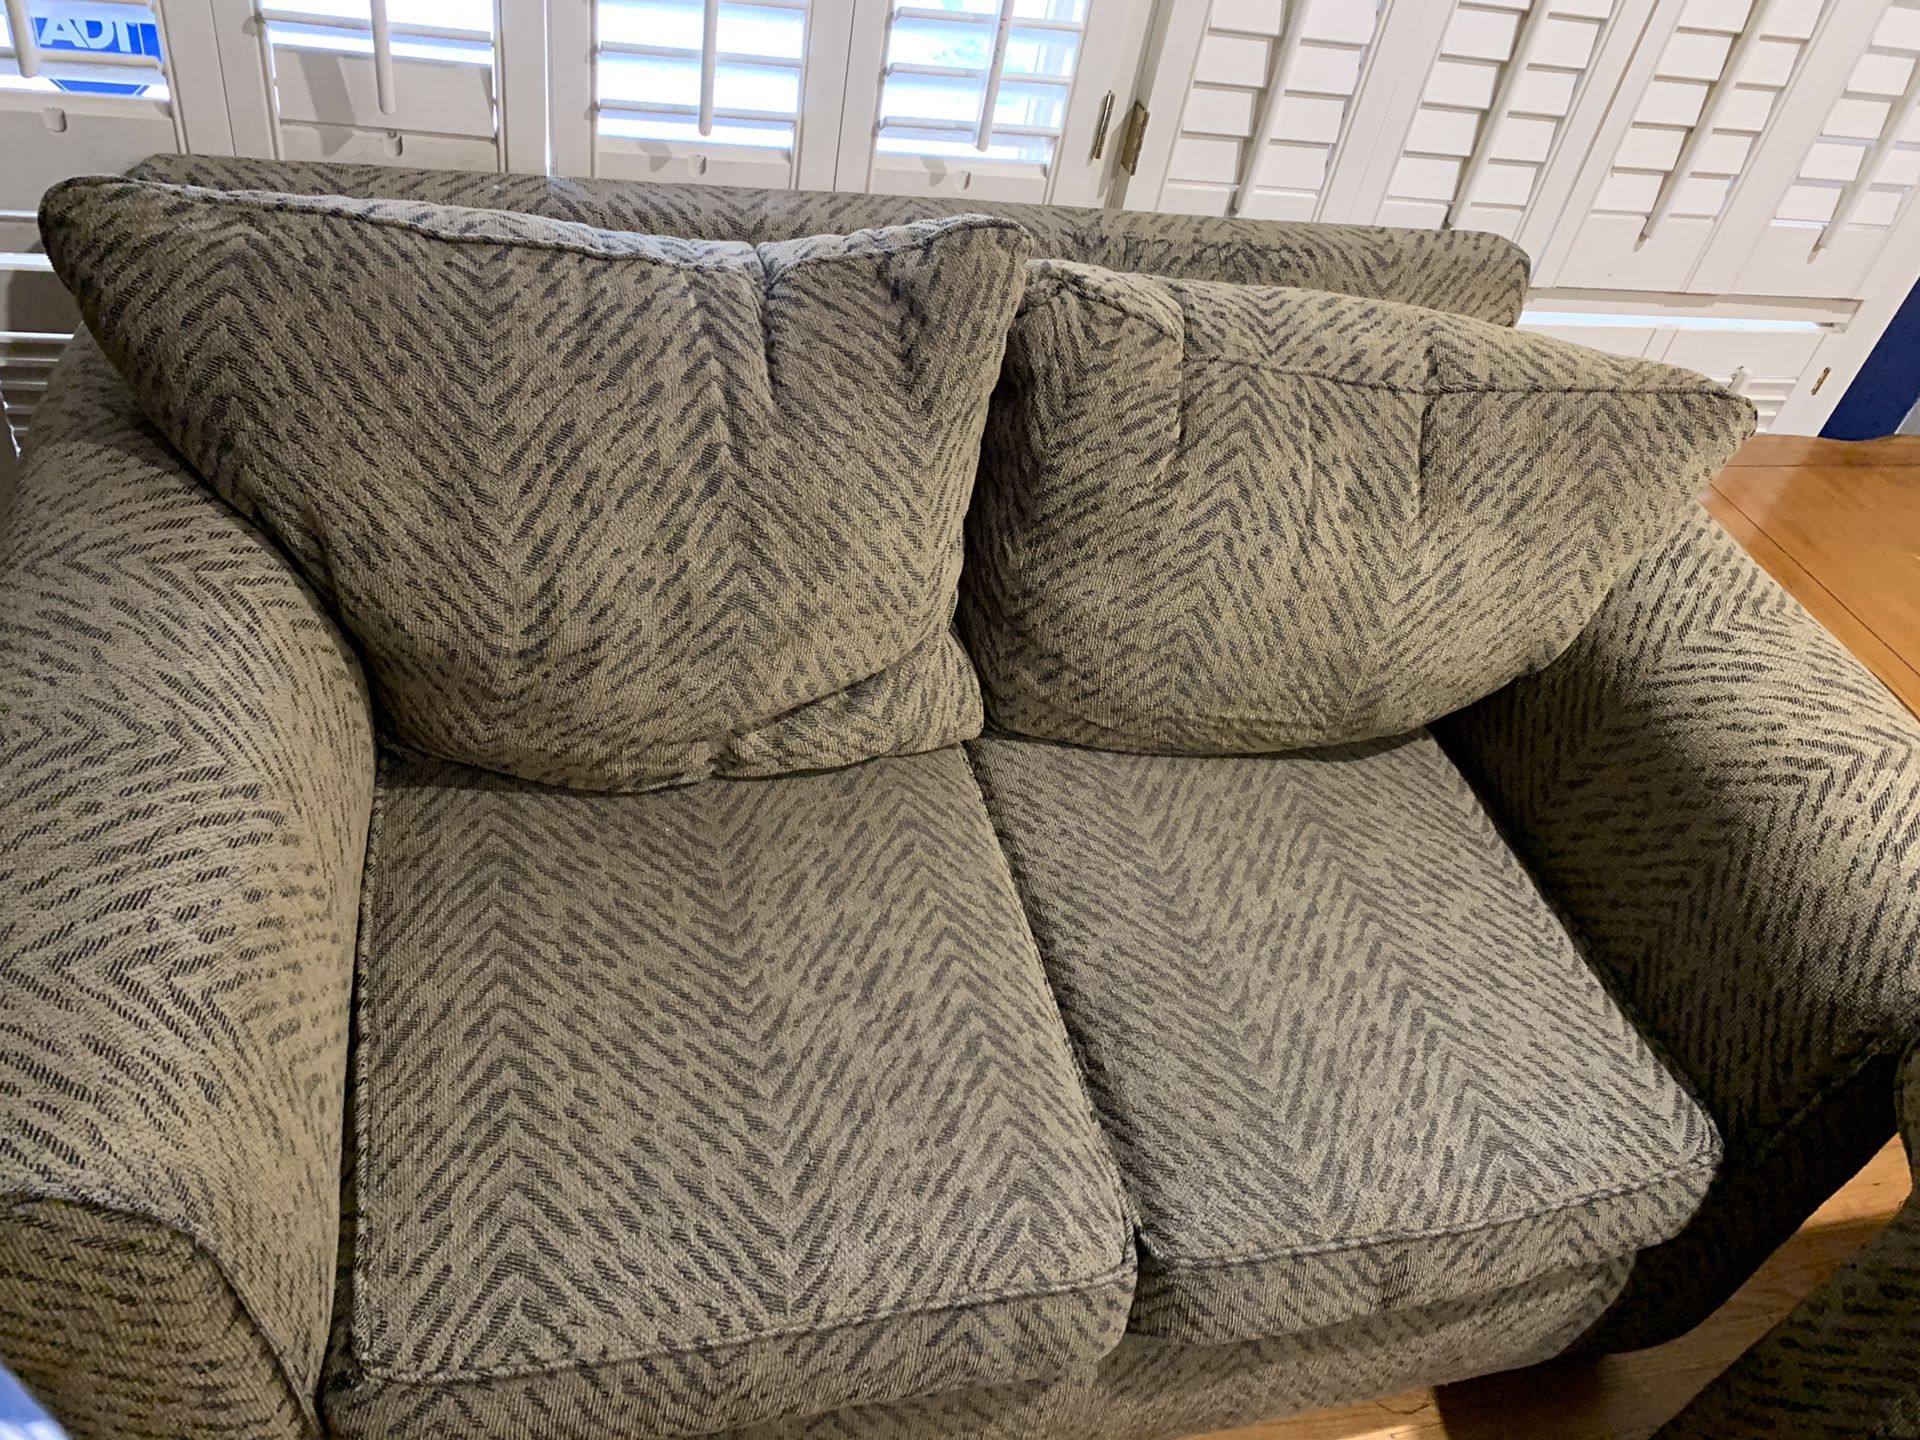 Couch, love seat, and recliner